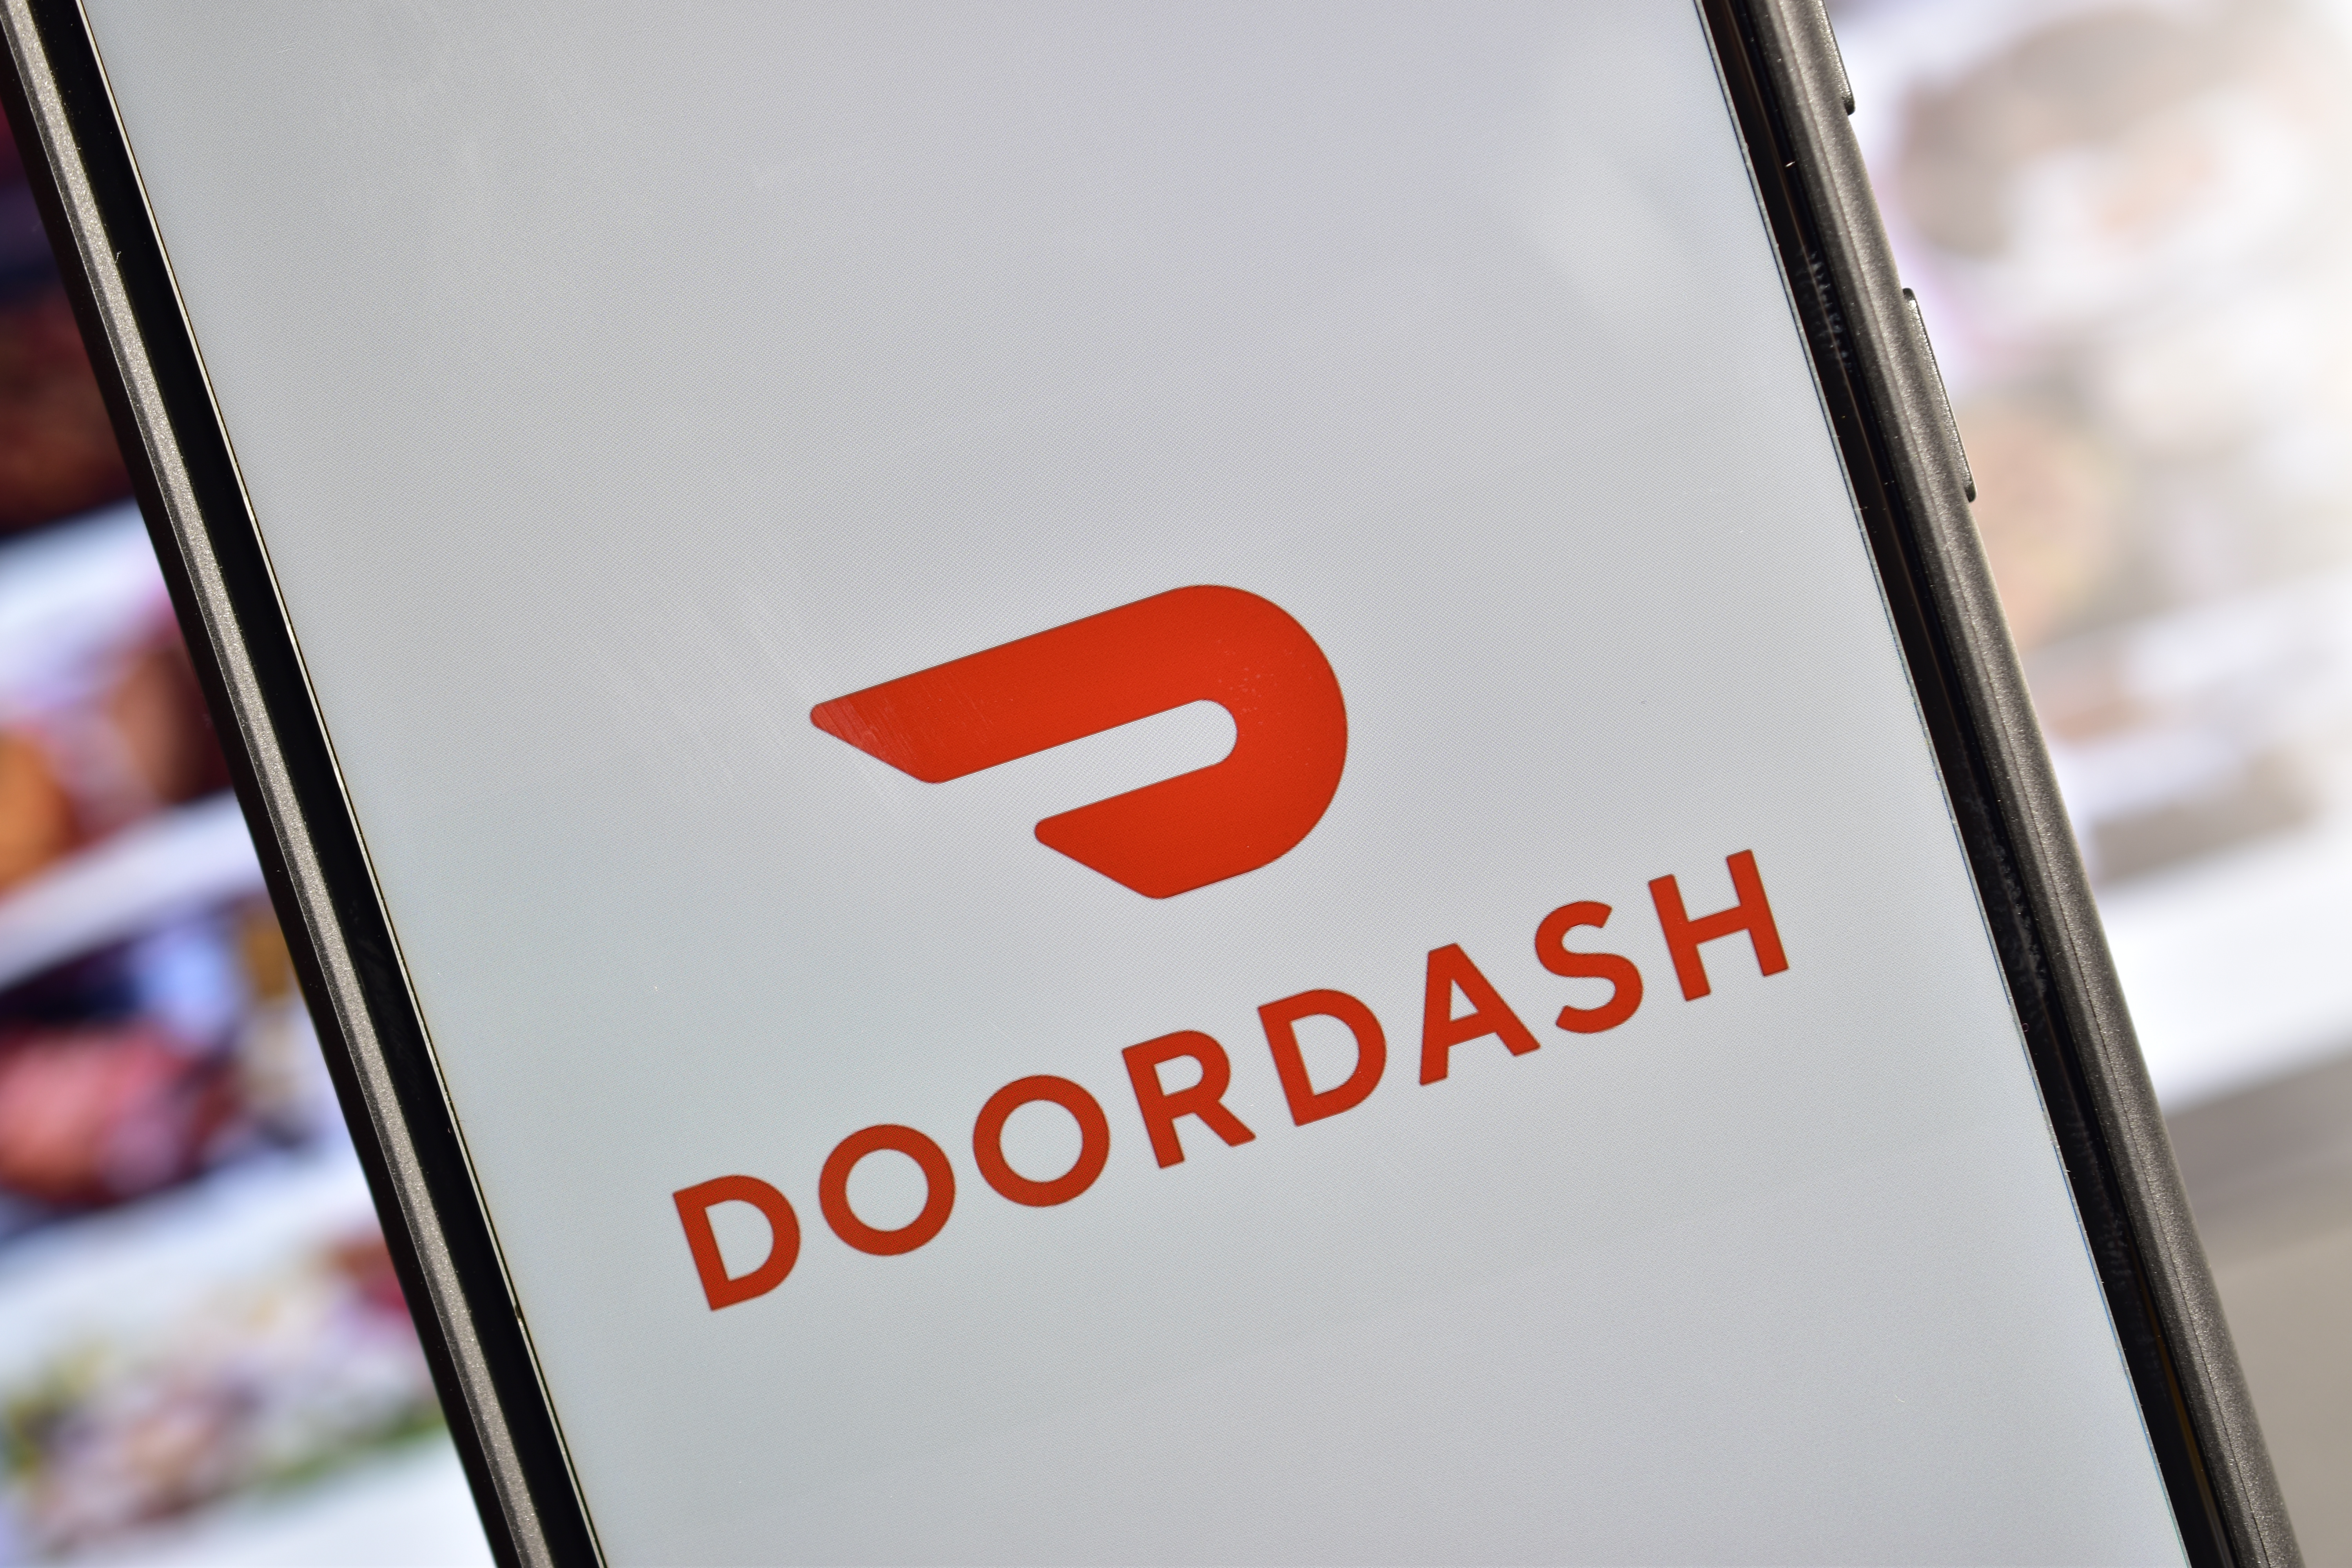 Market Research: DoorDash Testing Ultra-Fast Delivery, Full-Time Employment in NYC